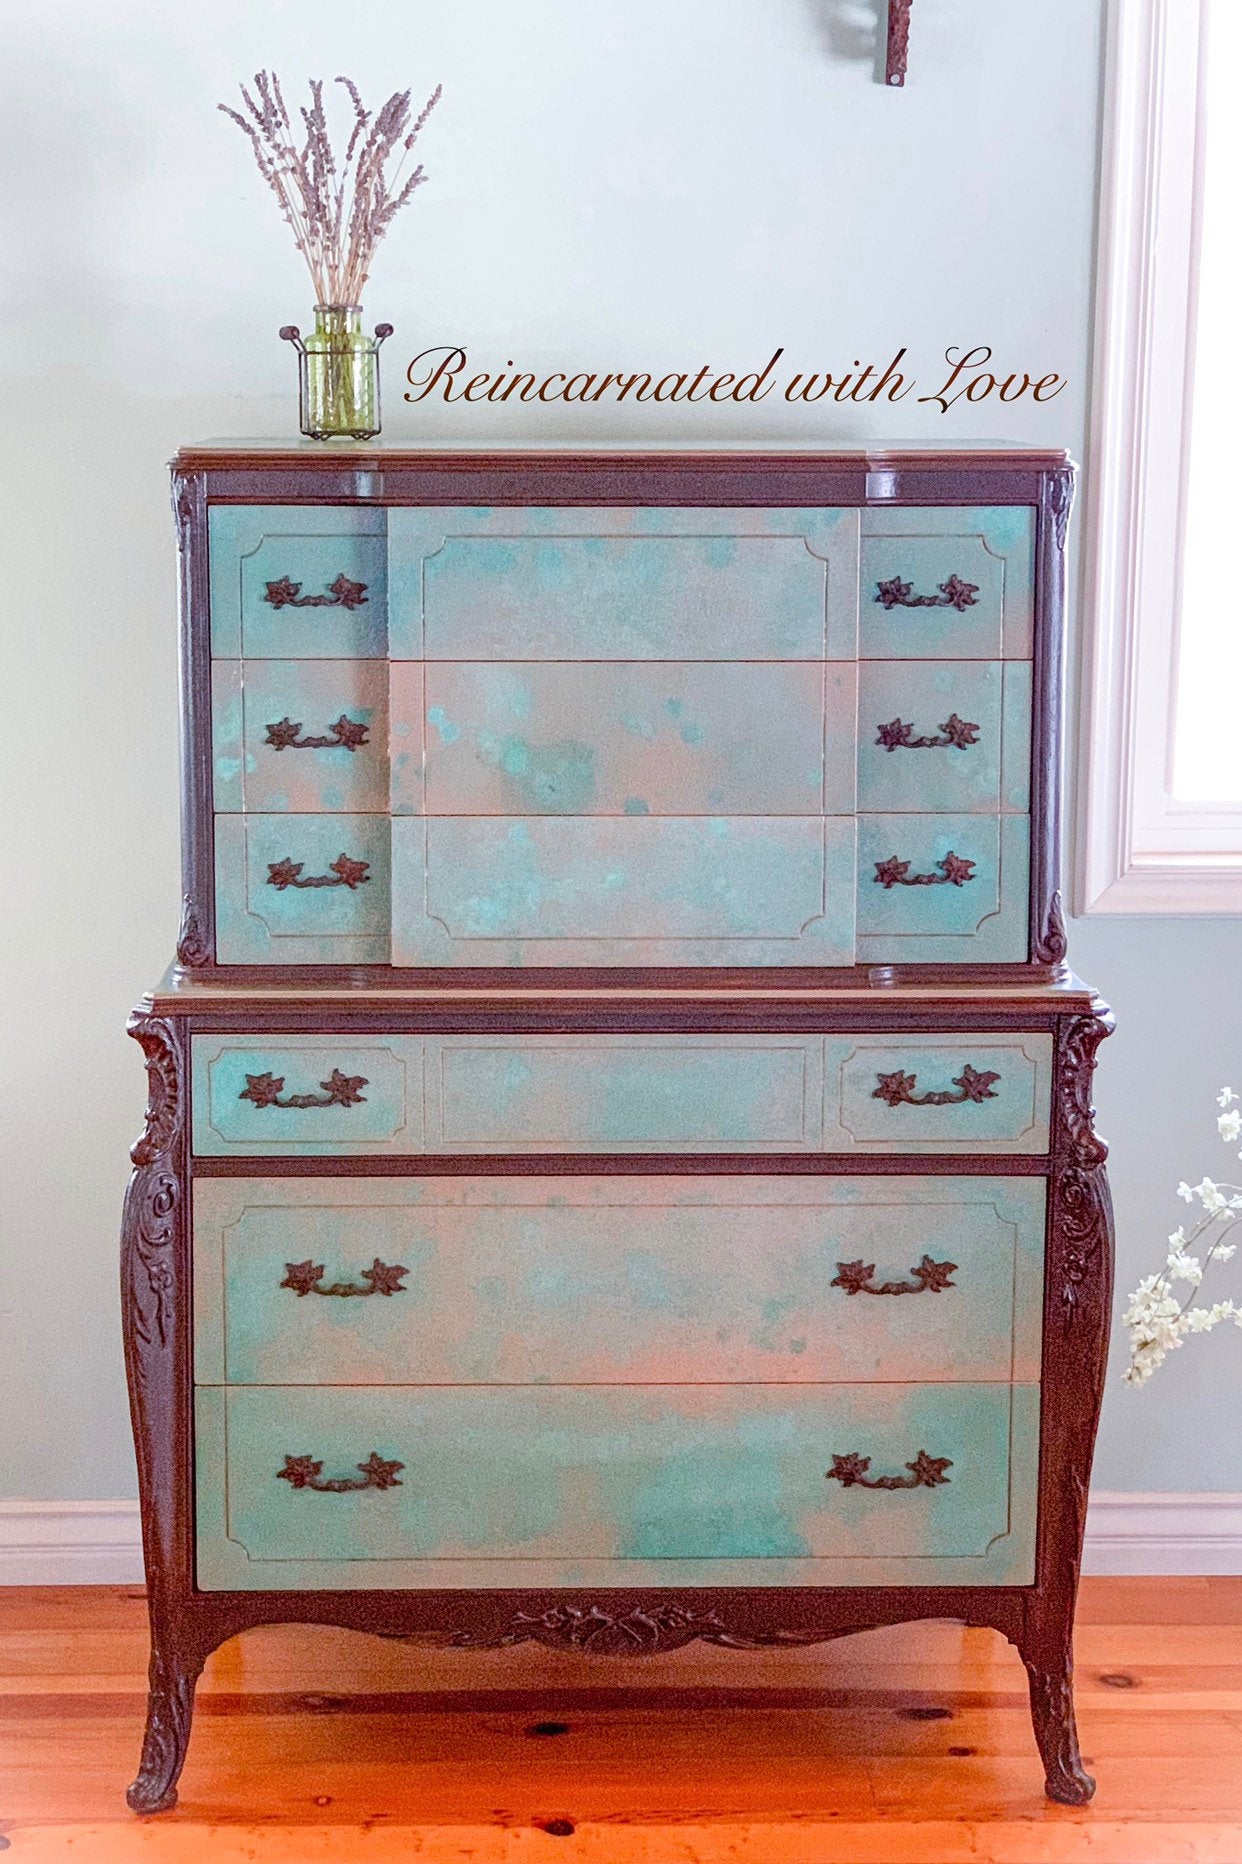 A tall, art-nouveau style, antique dresser, done in a green, patina finish with rusted iron accents.